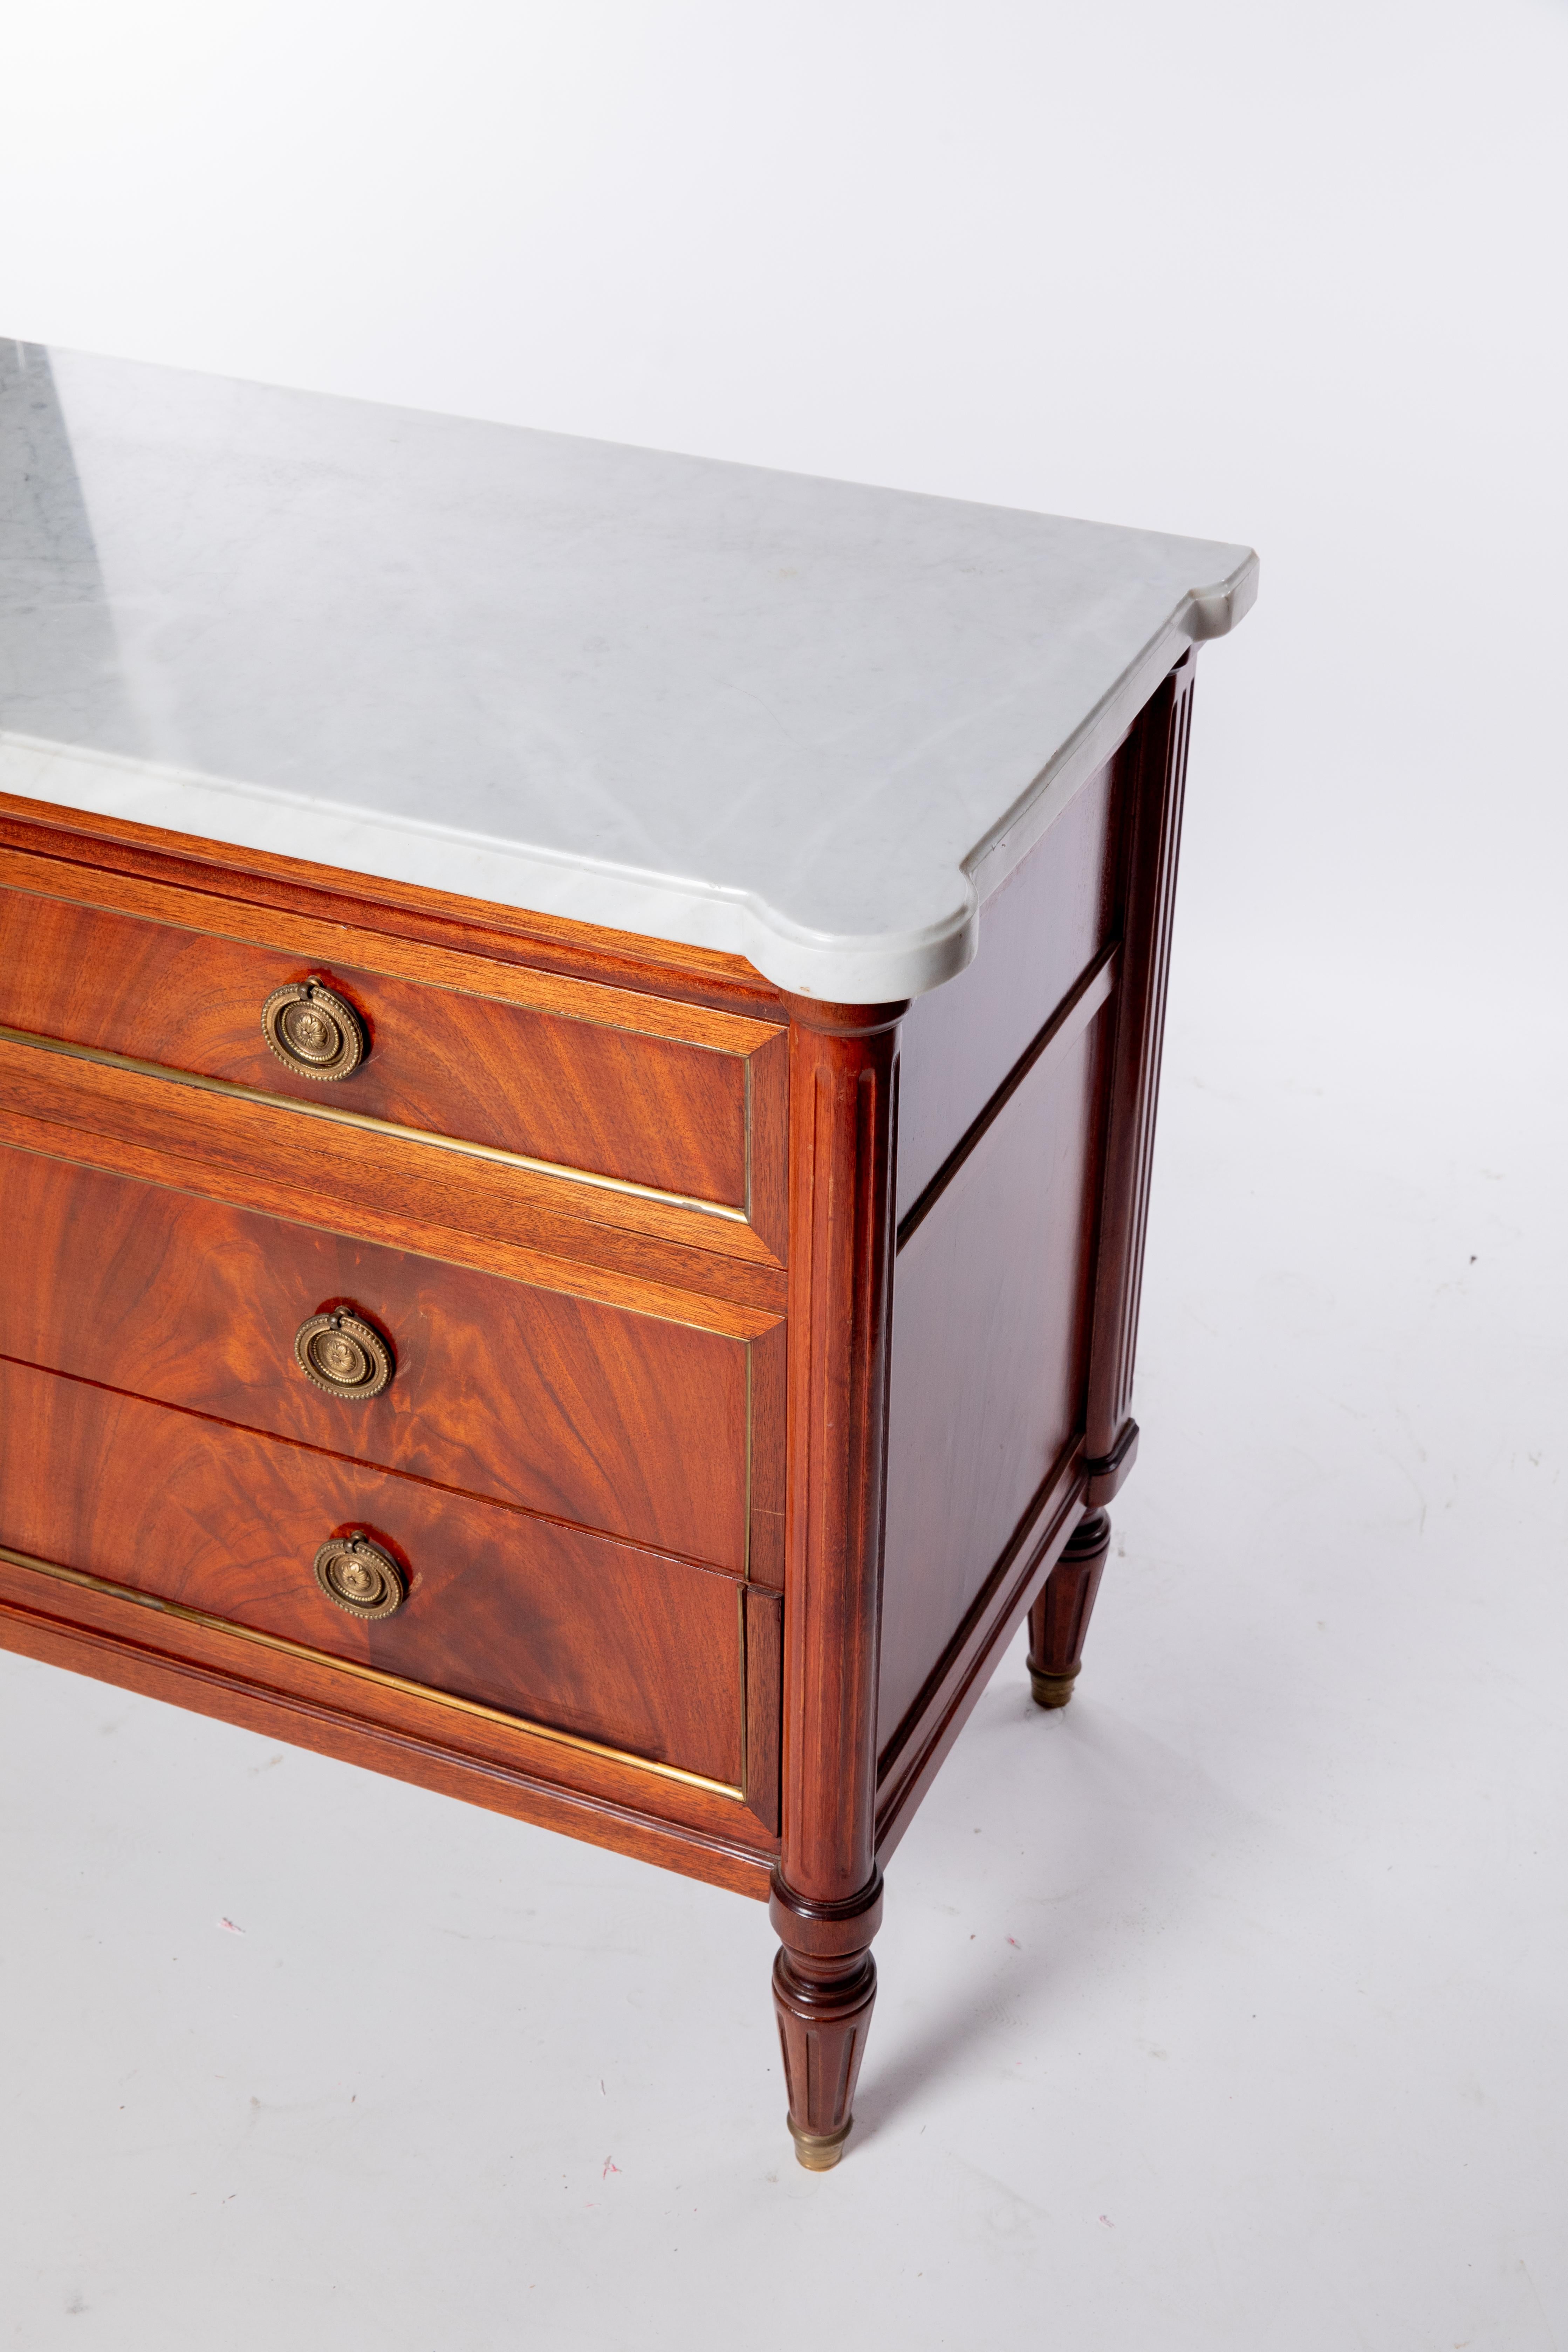 French Louis XVI style marble-top mahogany commode, 19th c., shaped marble top, over case fitted with four drawers, flanked by fluted corner posts, on tapered fluted legs, ending in metal-capped feet.